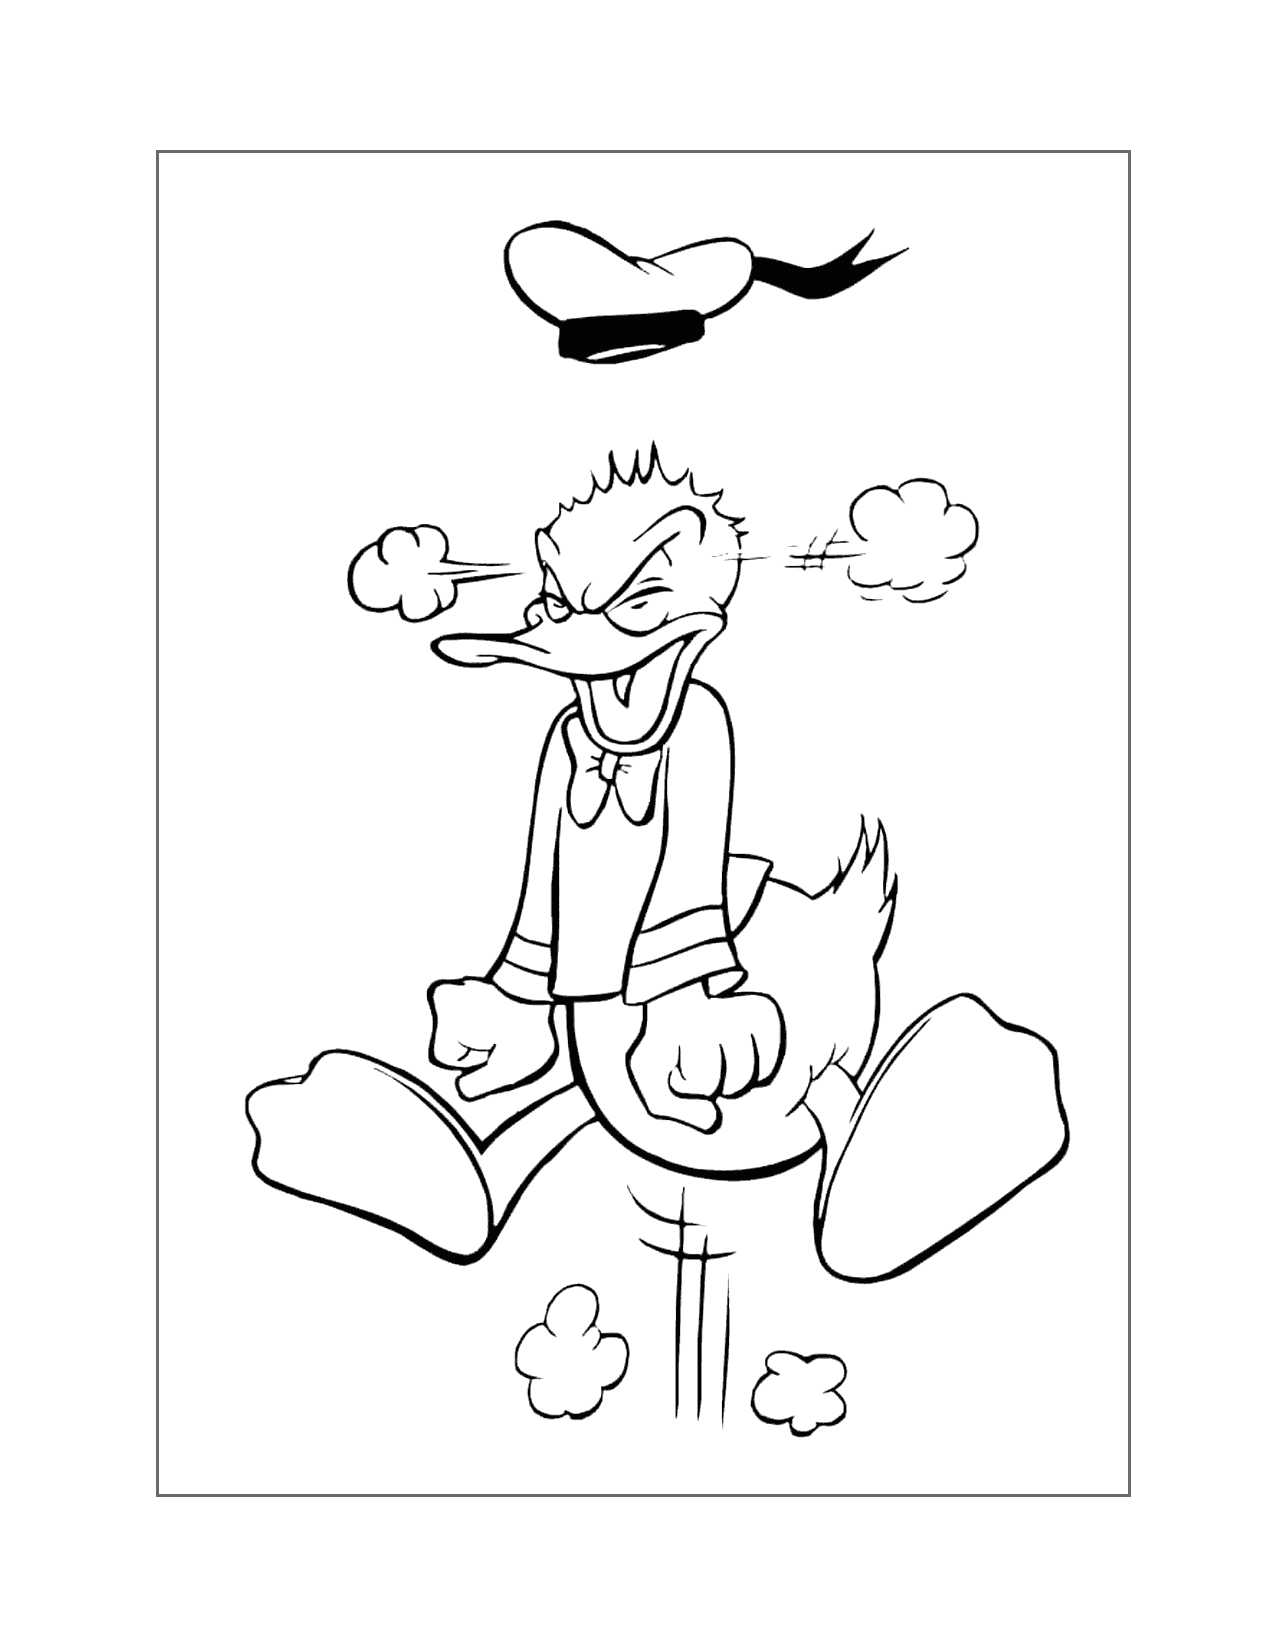 Donald Duck Blows His Top Coloring Page